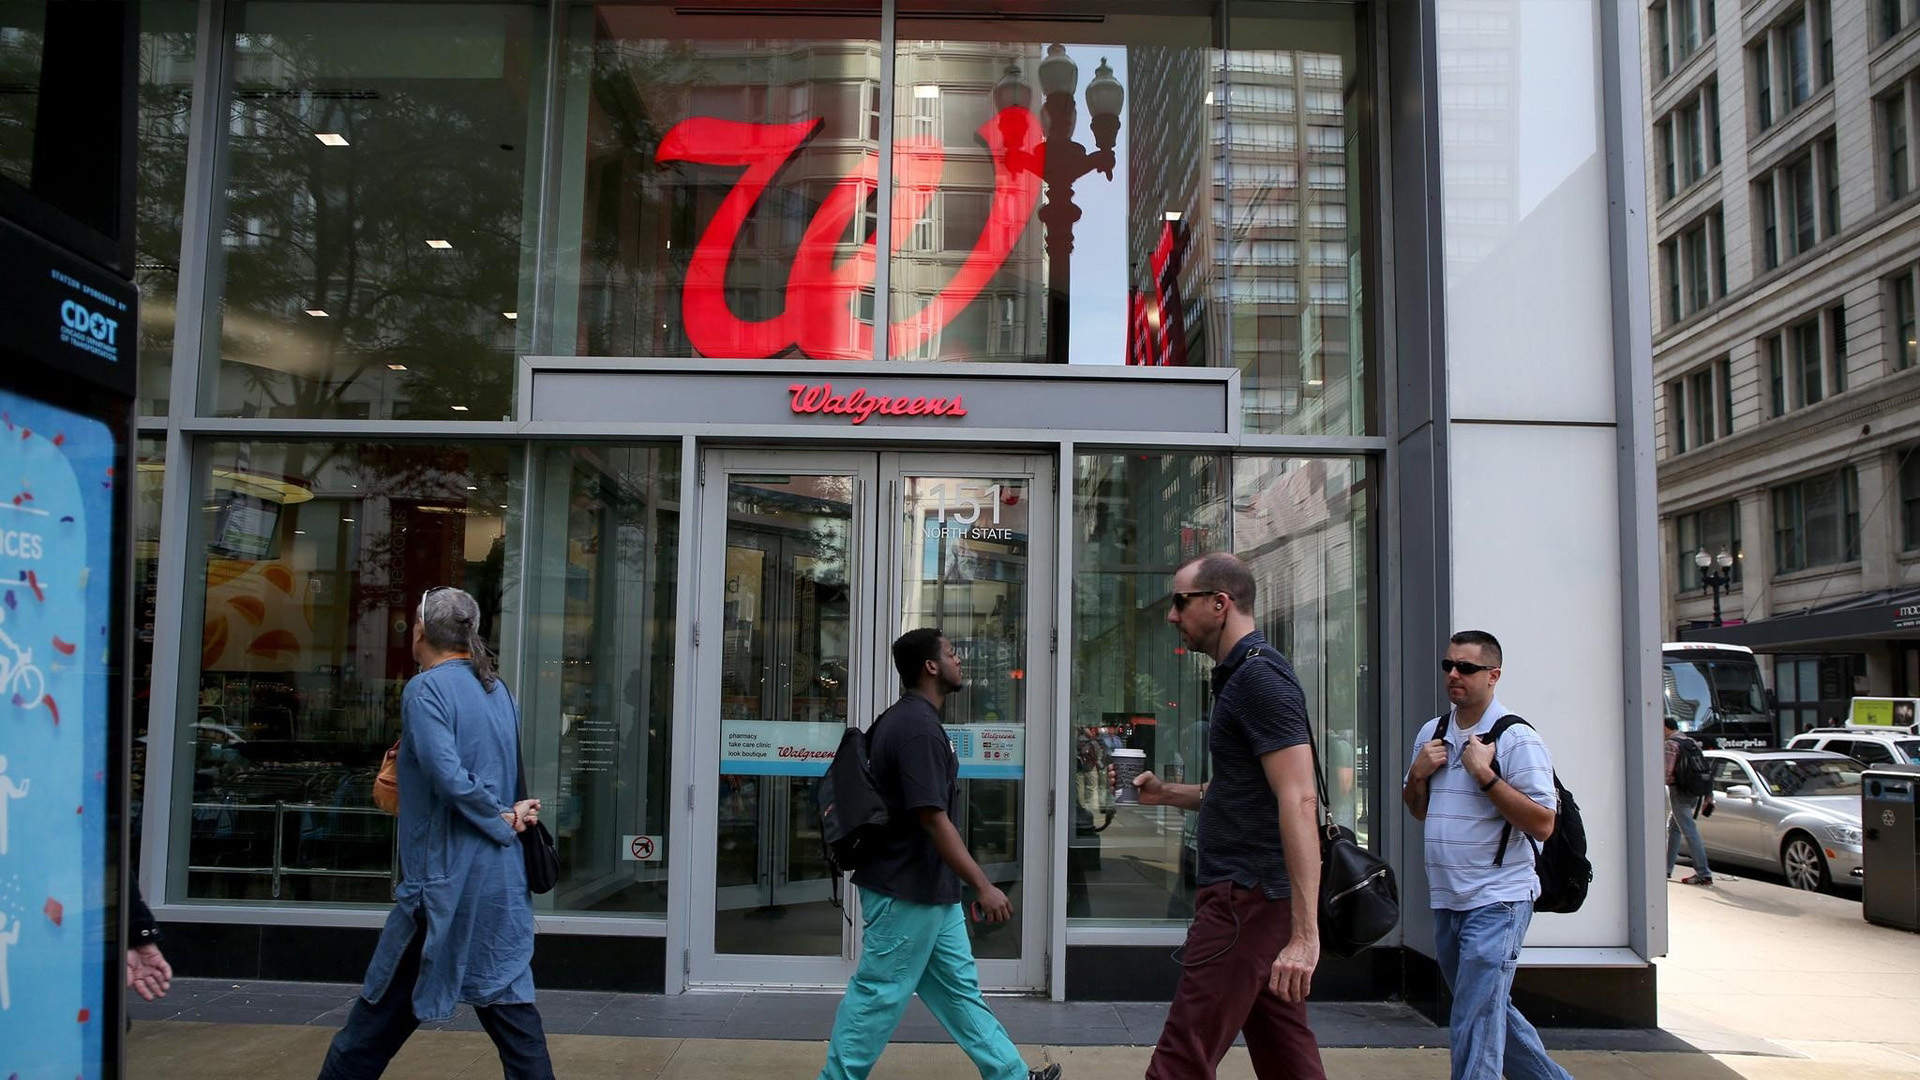 Walgreens CEO Tim Wentworth announced the company will shutter "a meaningful percent" of its 8,600 stores across the U.S.